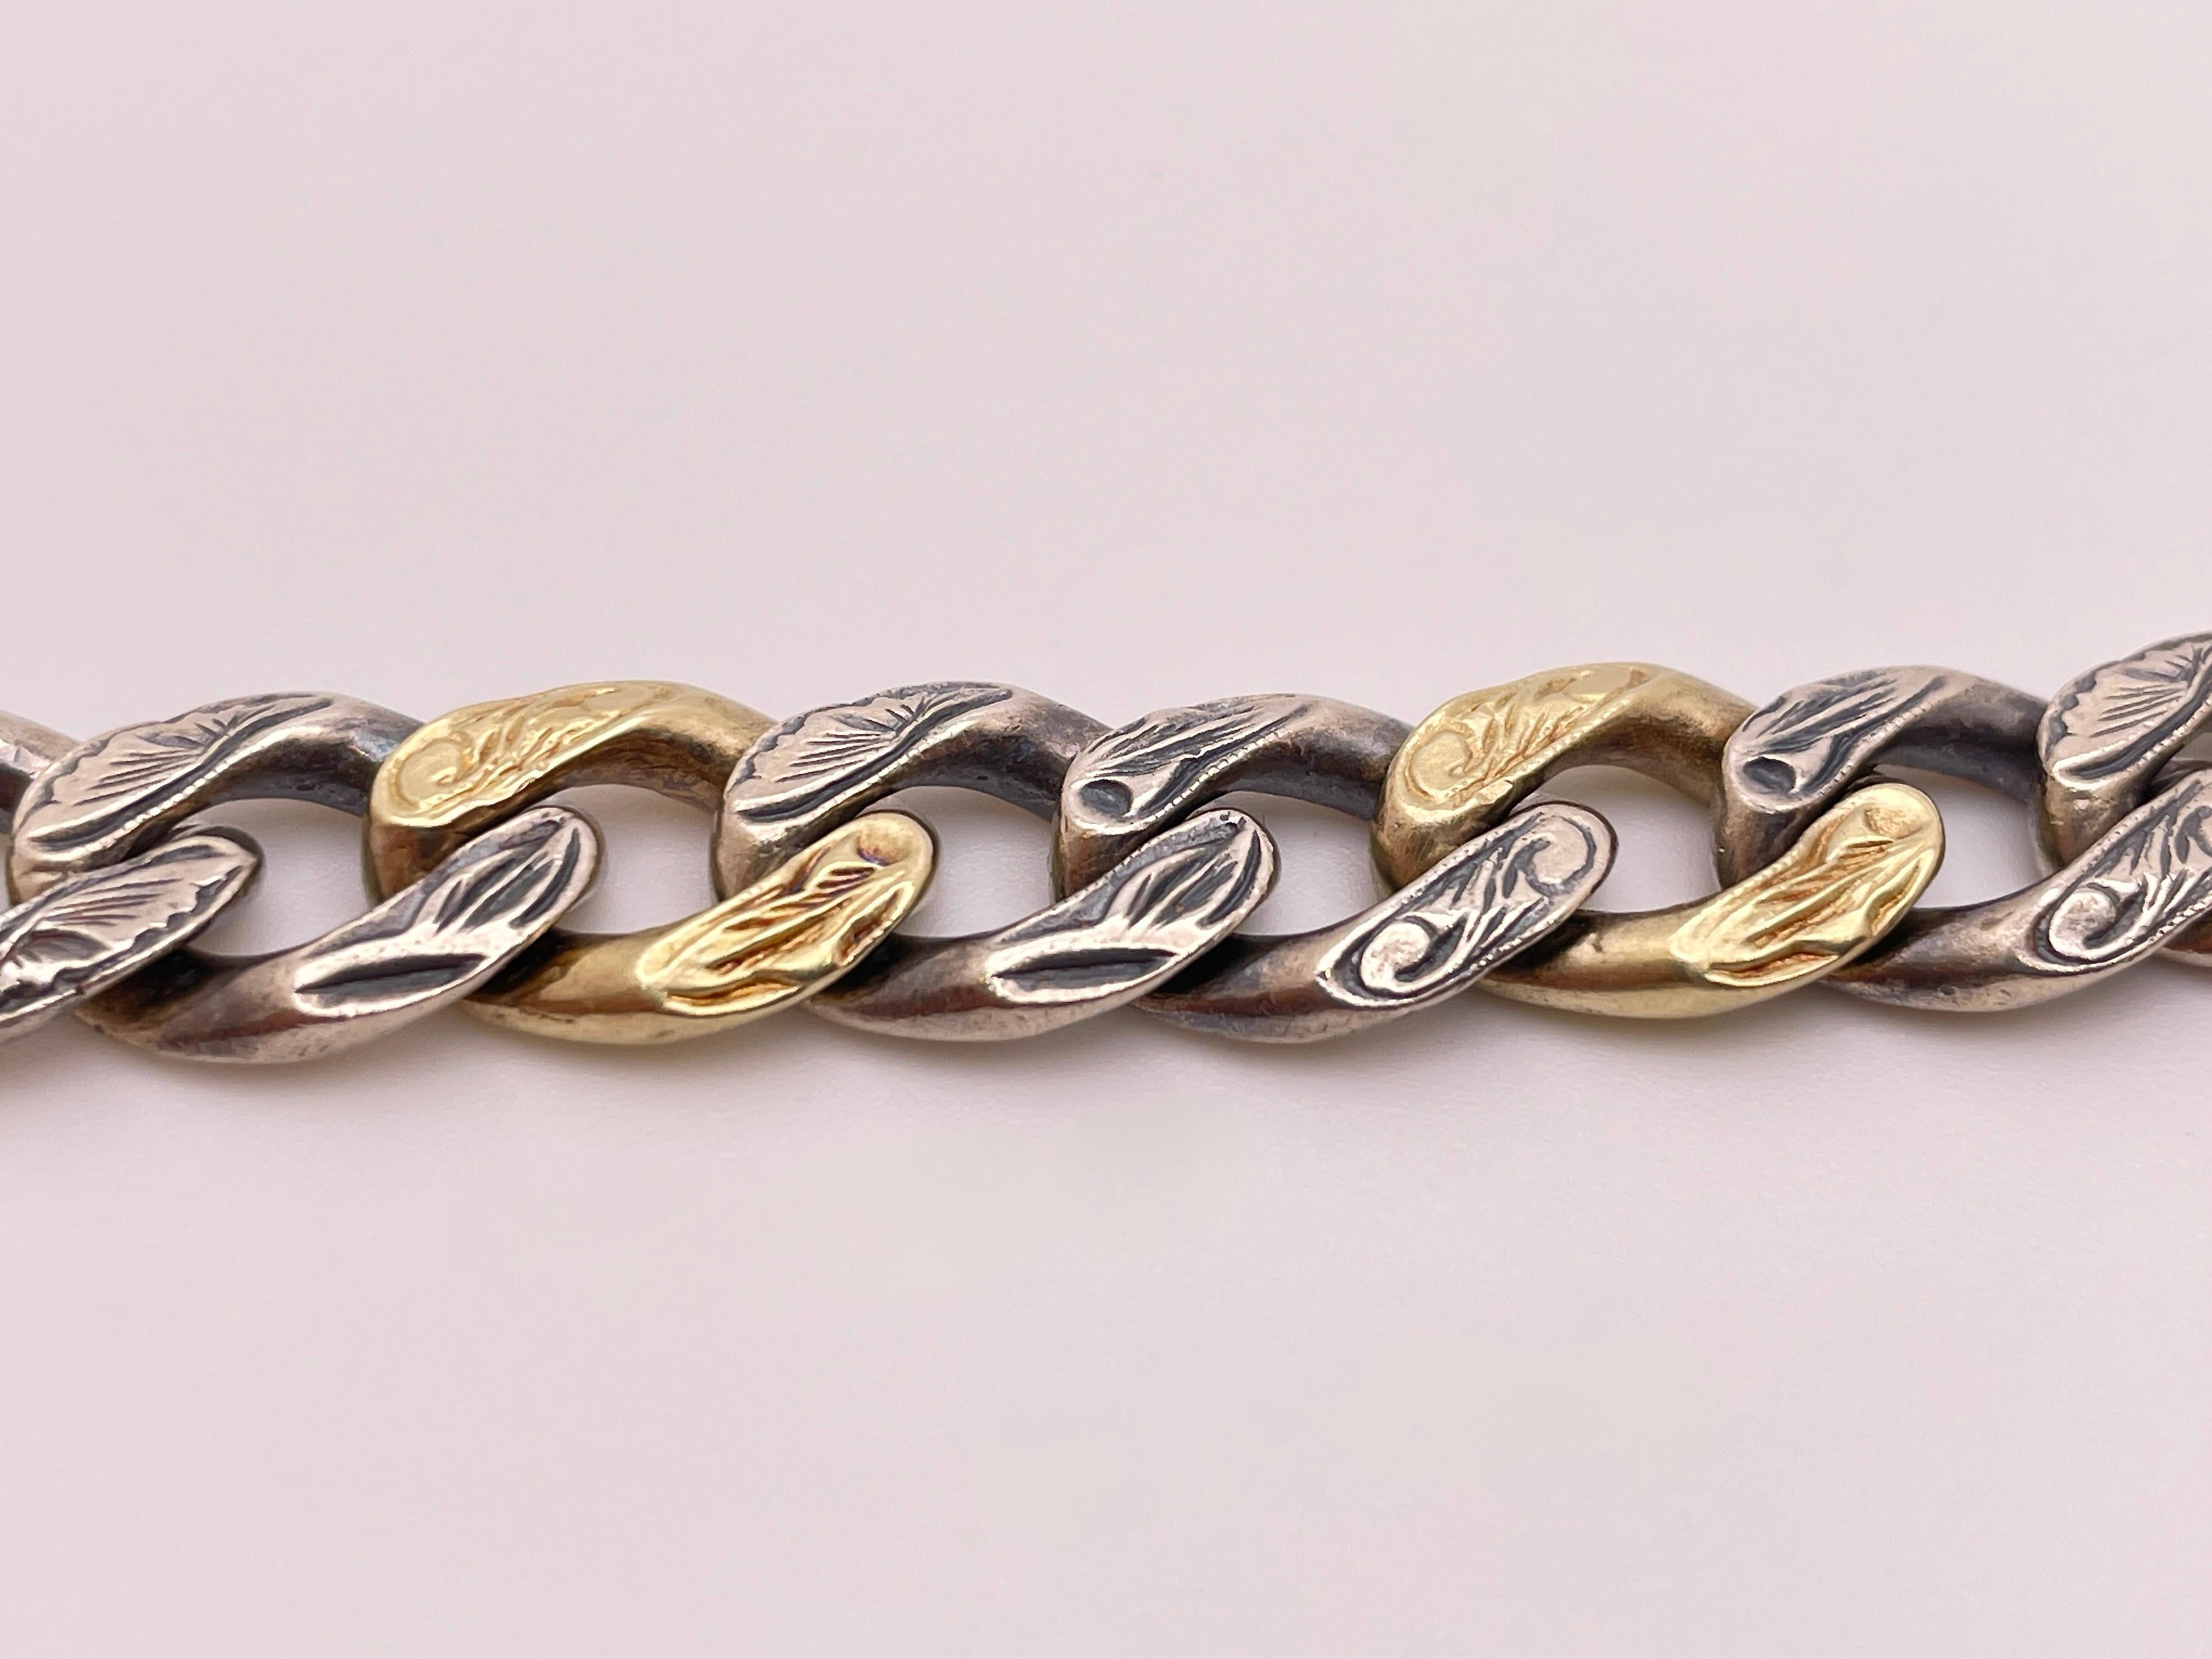 An original ZDNY Gothic 14K yellow gold and silver two-tone bracelet. Each link has a beautiful carved design. Marked 